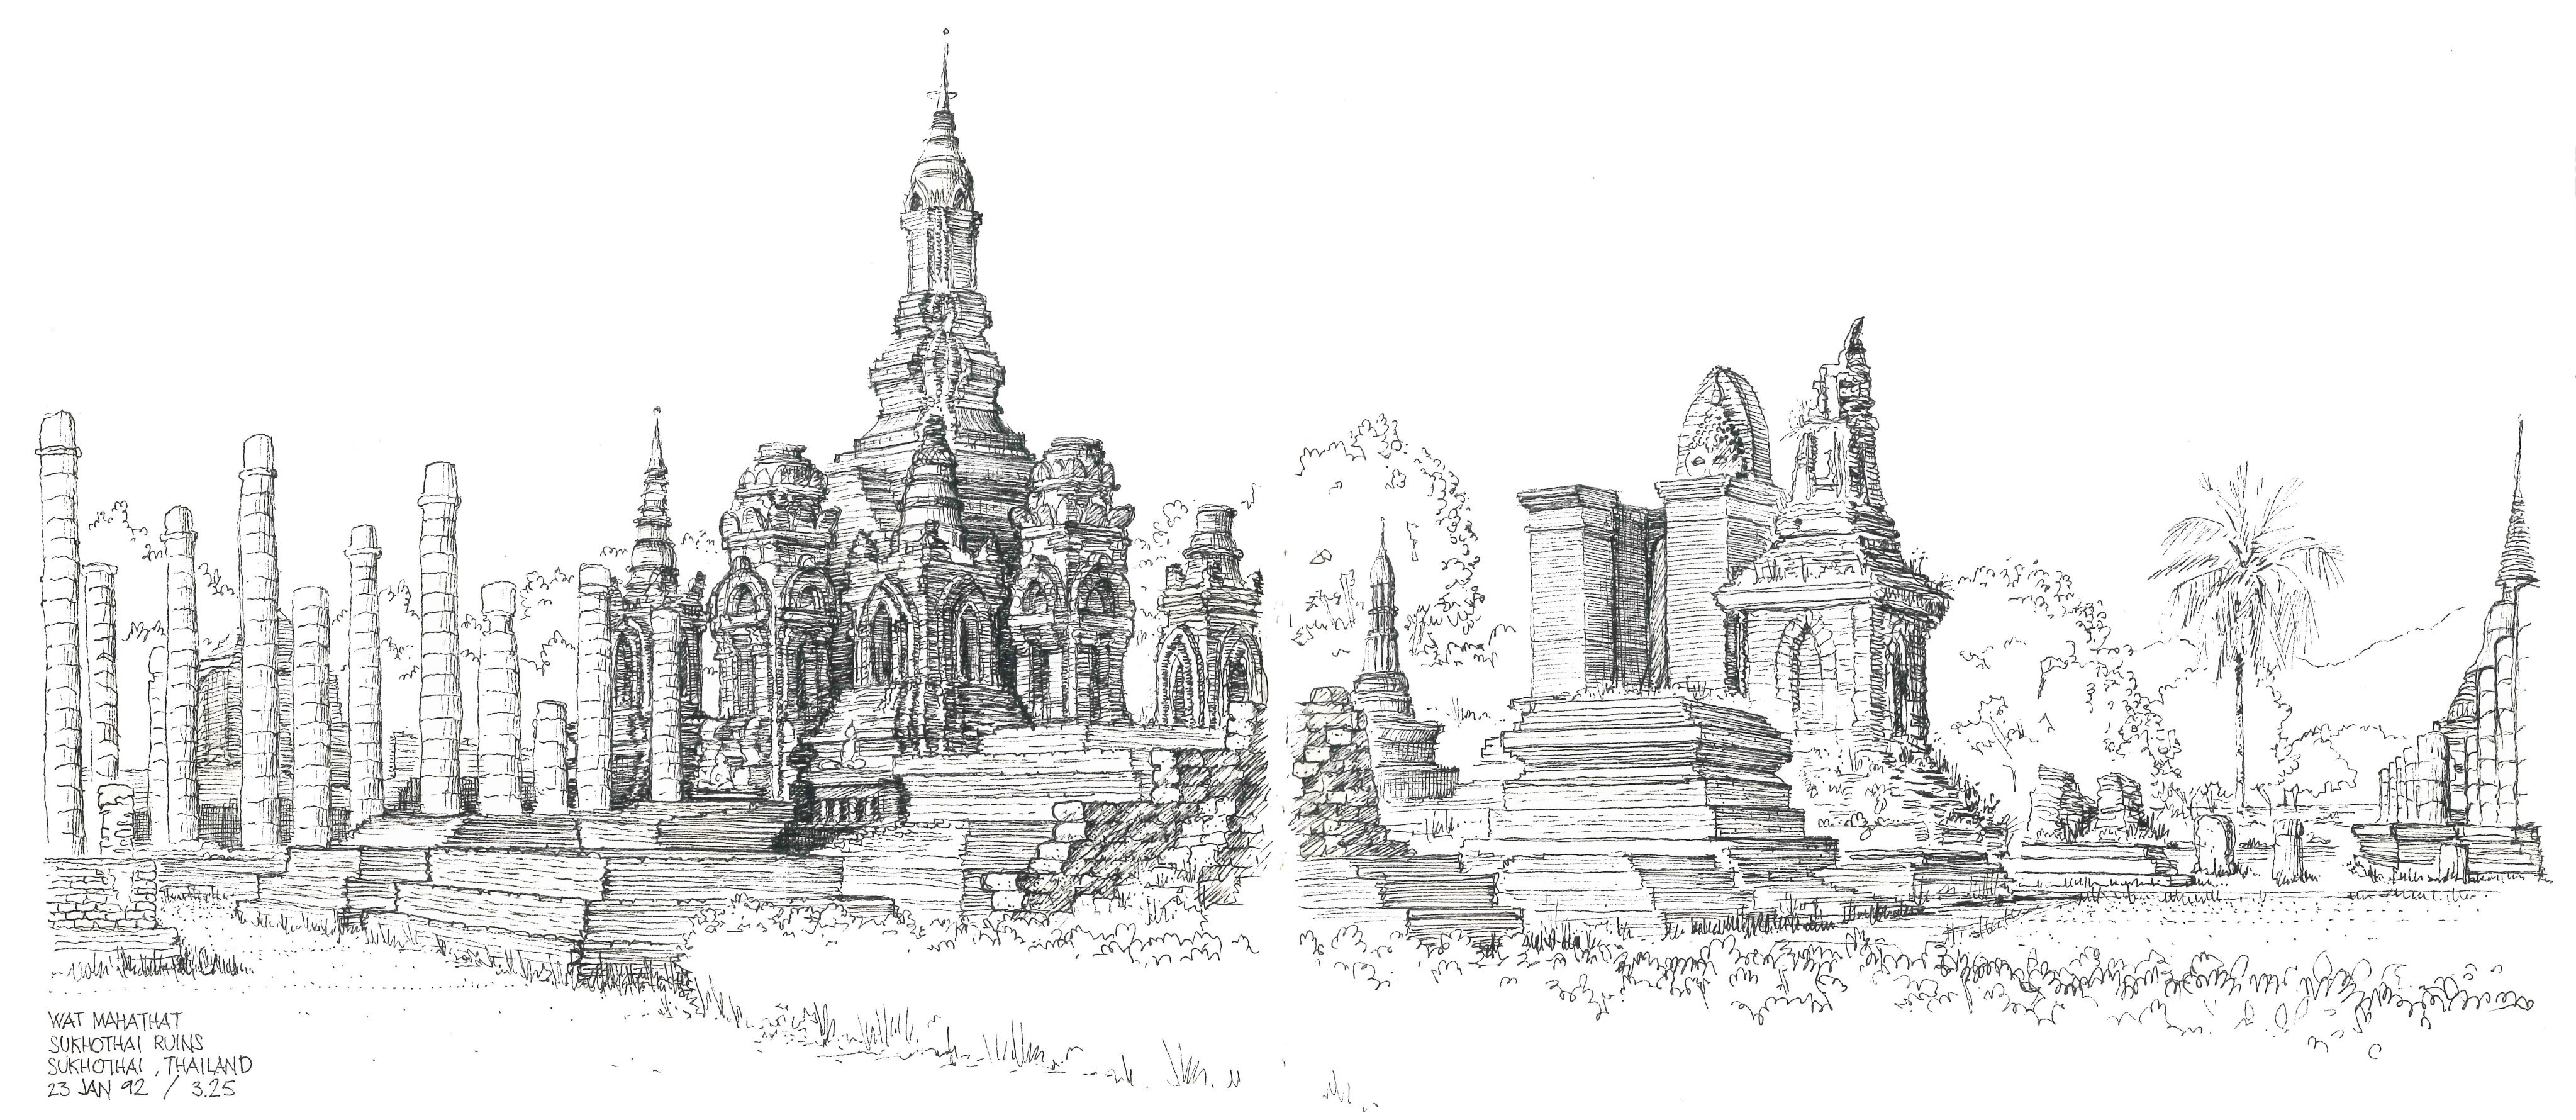 The Bumbling Traveller: Sketching the World, by Tom Schmidt, includes an illustration of the Sukhothai ruins in Thailand, accompanied by the caption “Sometimes a place is so awe-inspiring that more than one sketchbook page is required to capture its grandeur.” Photo: courtesy of Tom Schmidt